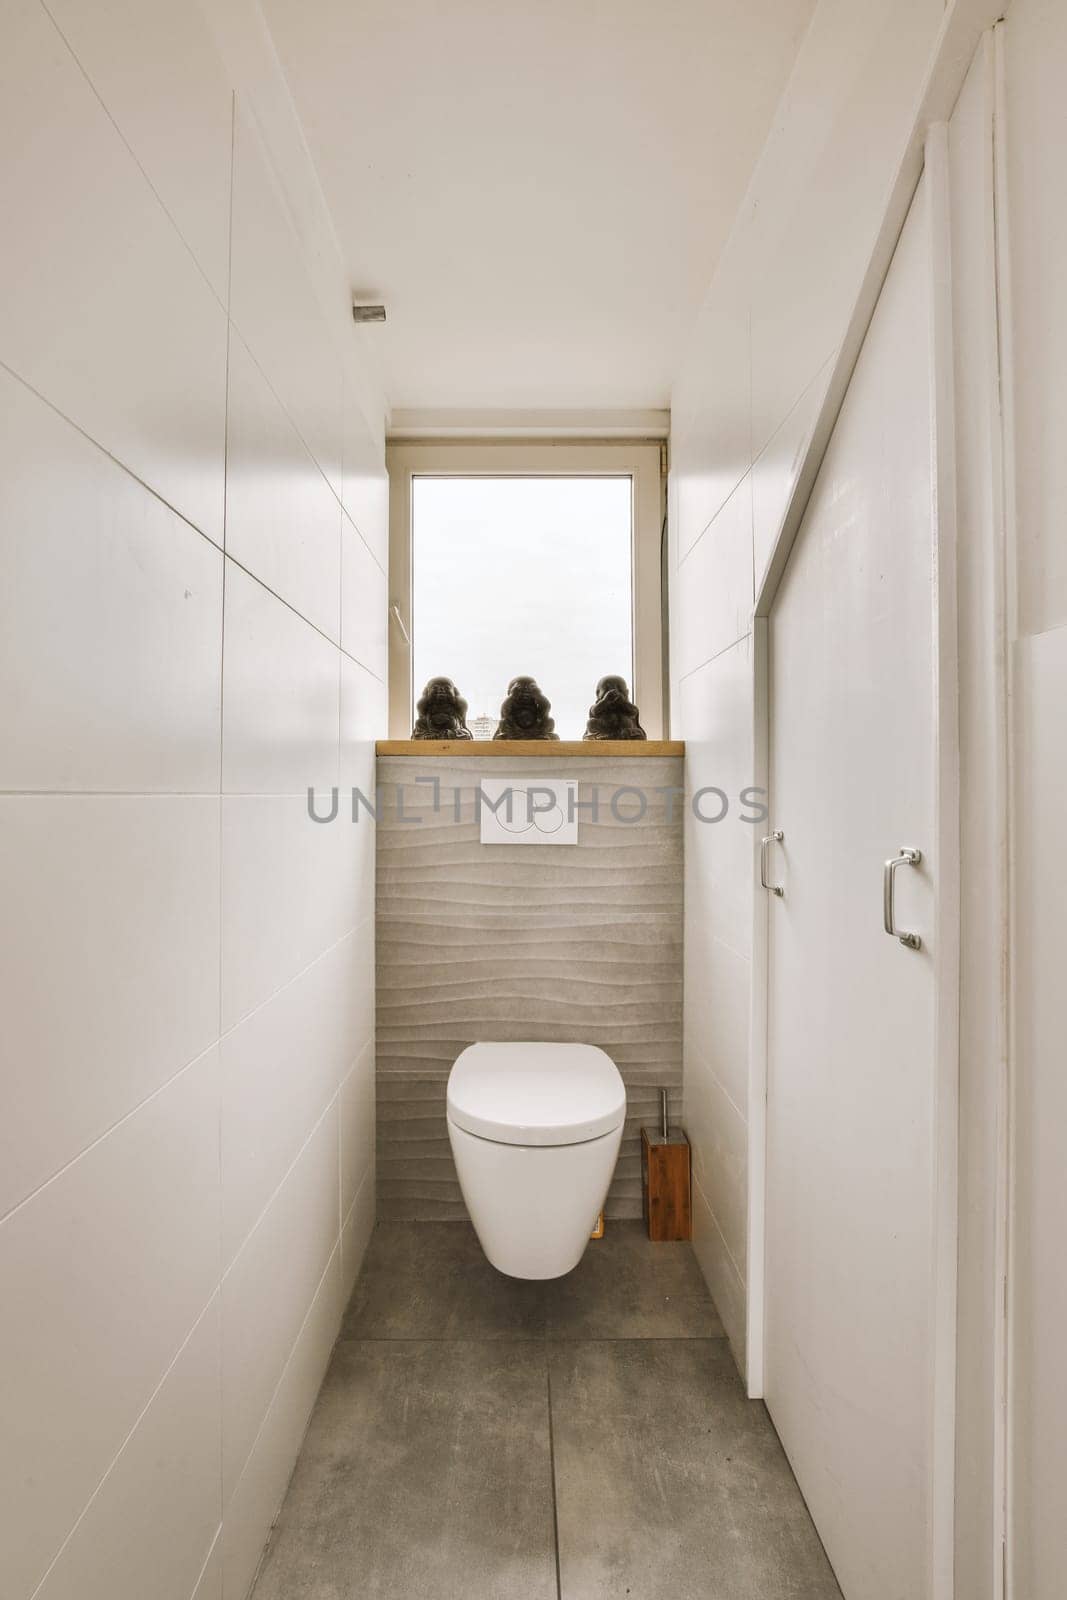 a toilet in the corner of a bathroom with two people sitting on the window ledge above it and looking out